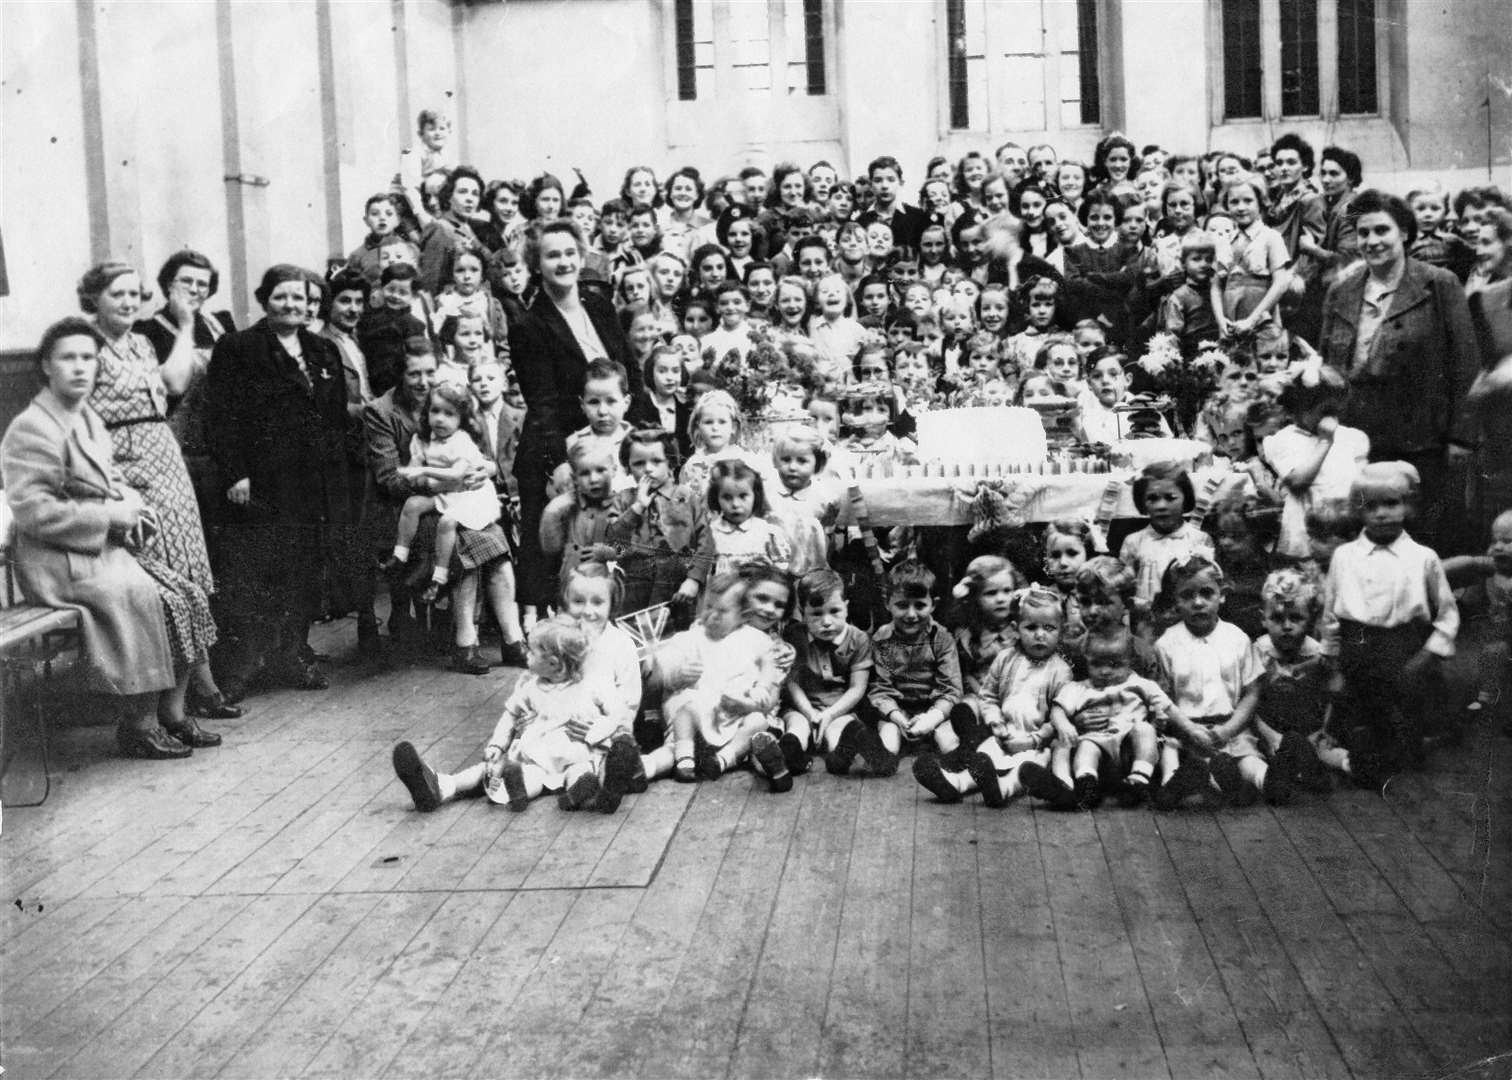 VE Day celebrations in Inverness in 1945. Inverness Local History Forum members are in dispute if it was at the Rose Street hall or Dr Black's hall in Bank Street.